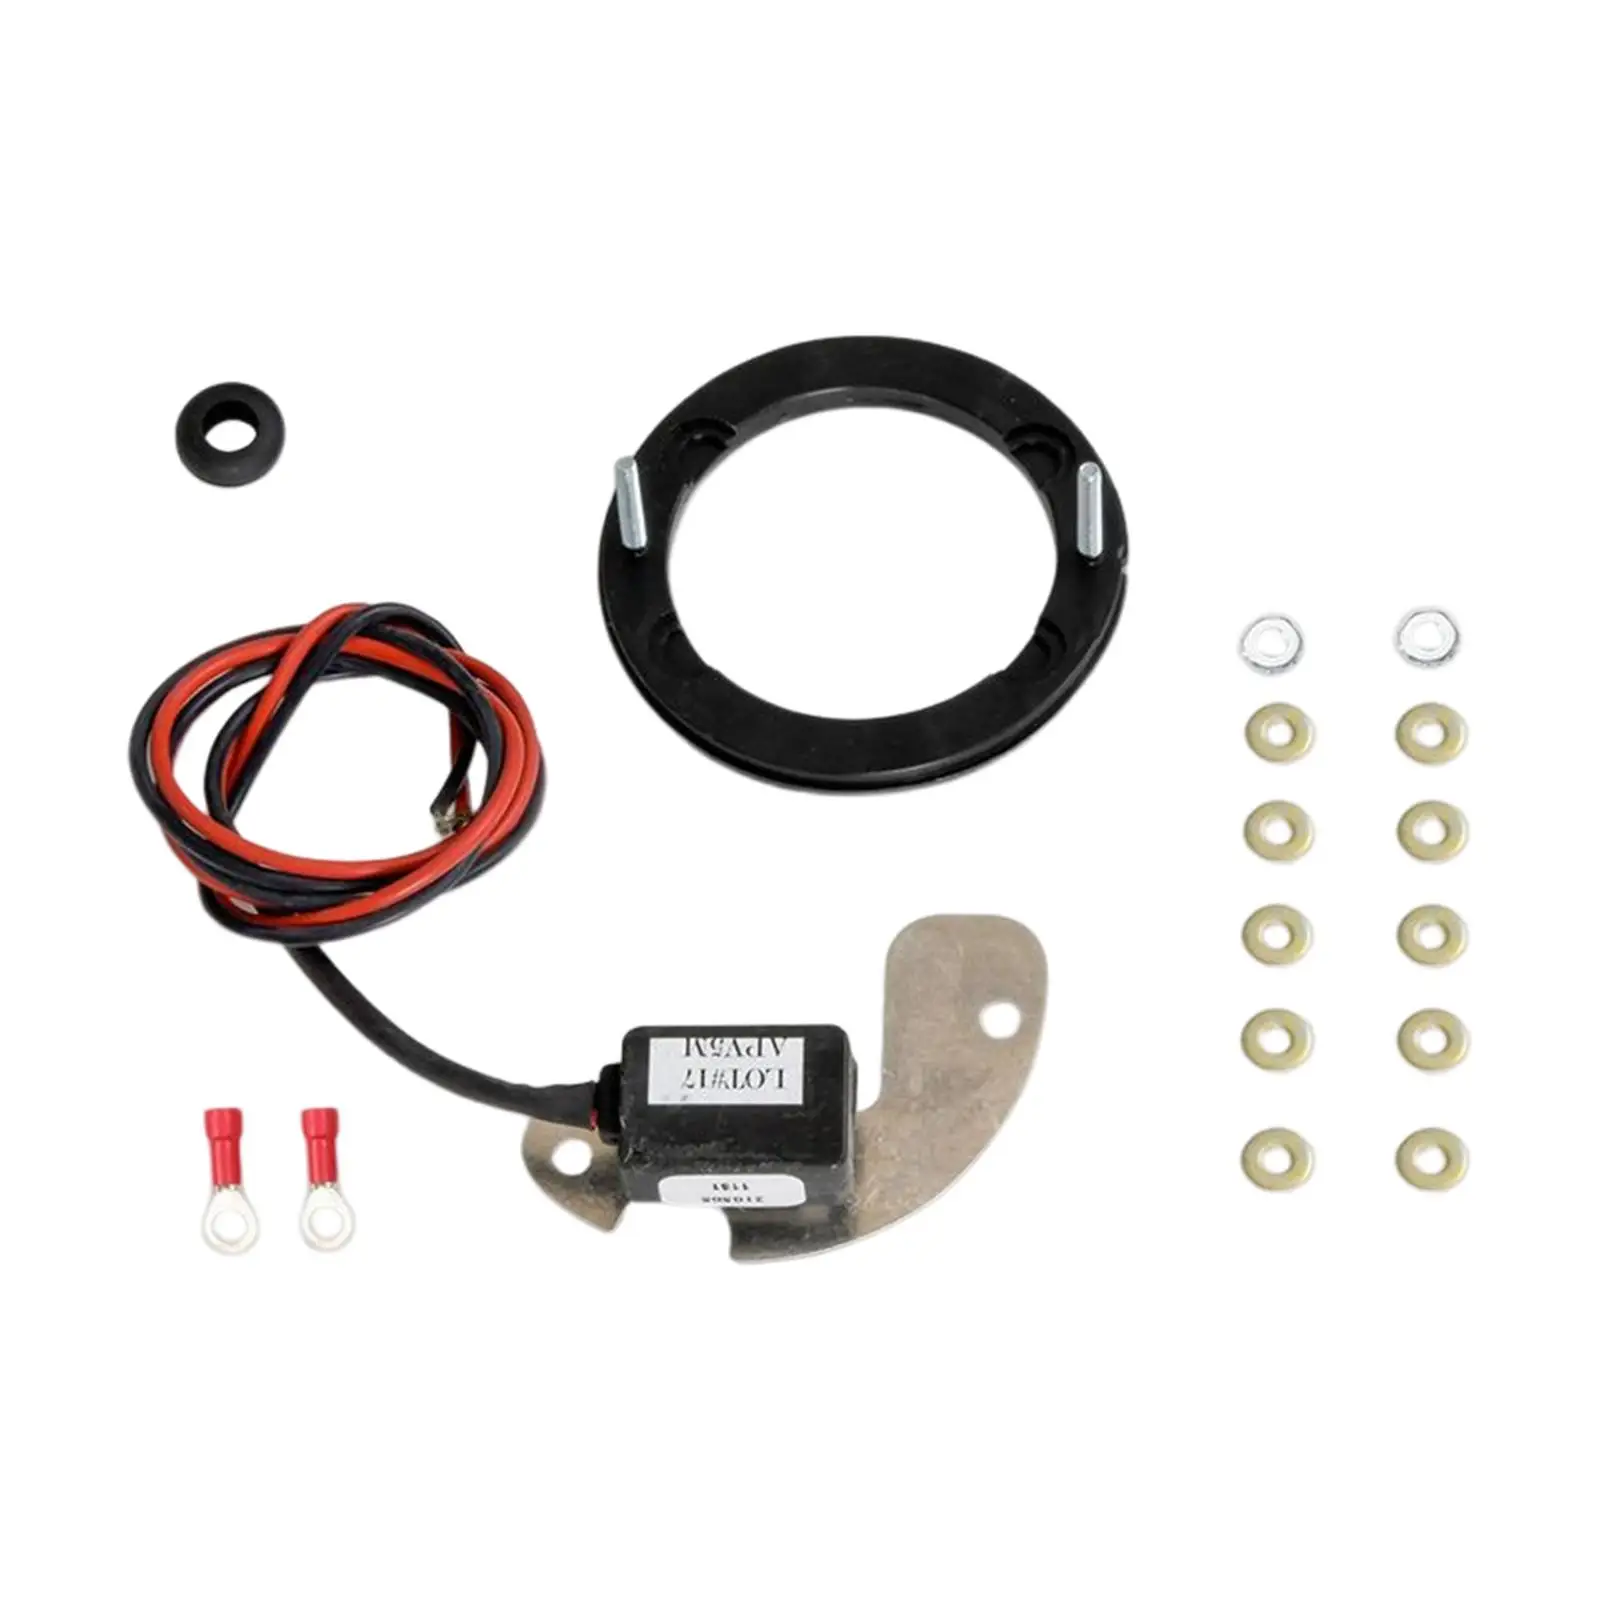 1181 Ignitor High Performance Sturdy Ignition Module Conversion Set for Delco 8 Cylinder 1956-1974 Repair Refitting Upgrade